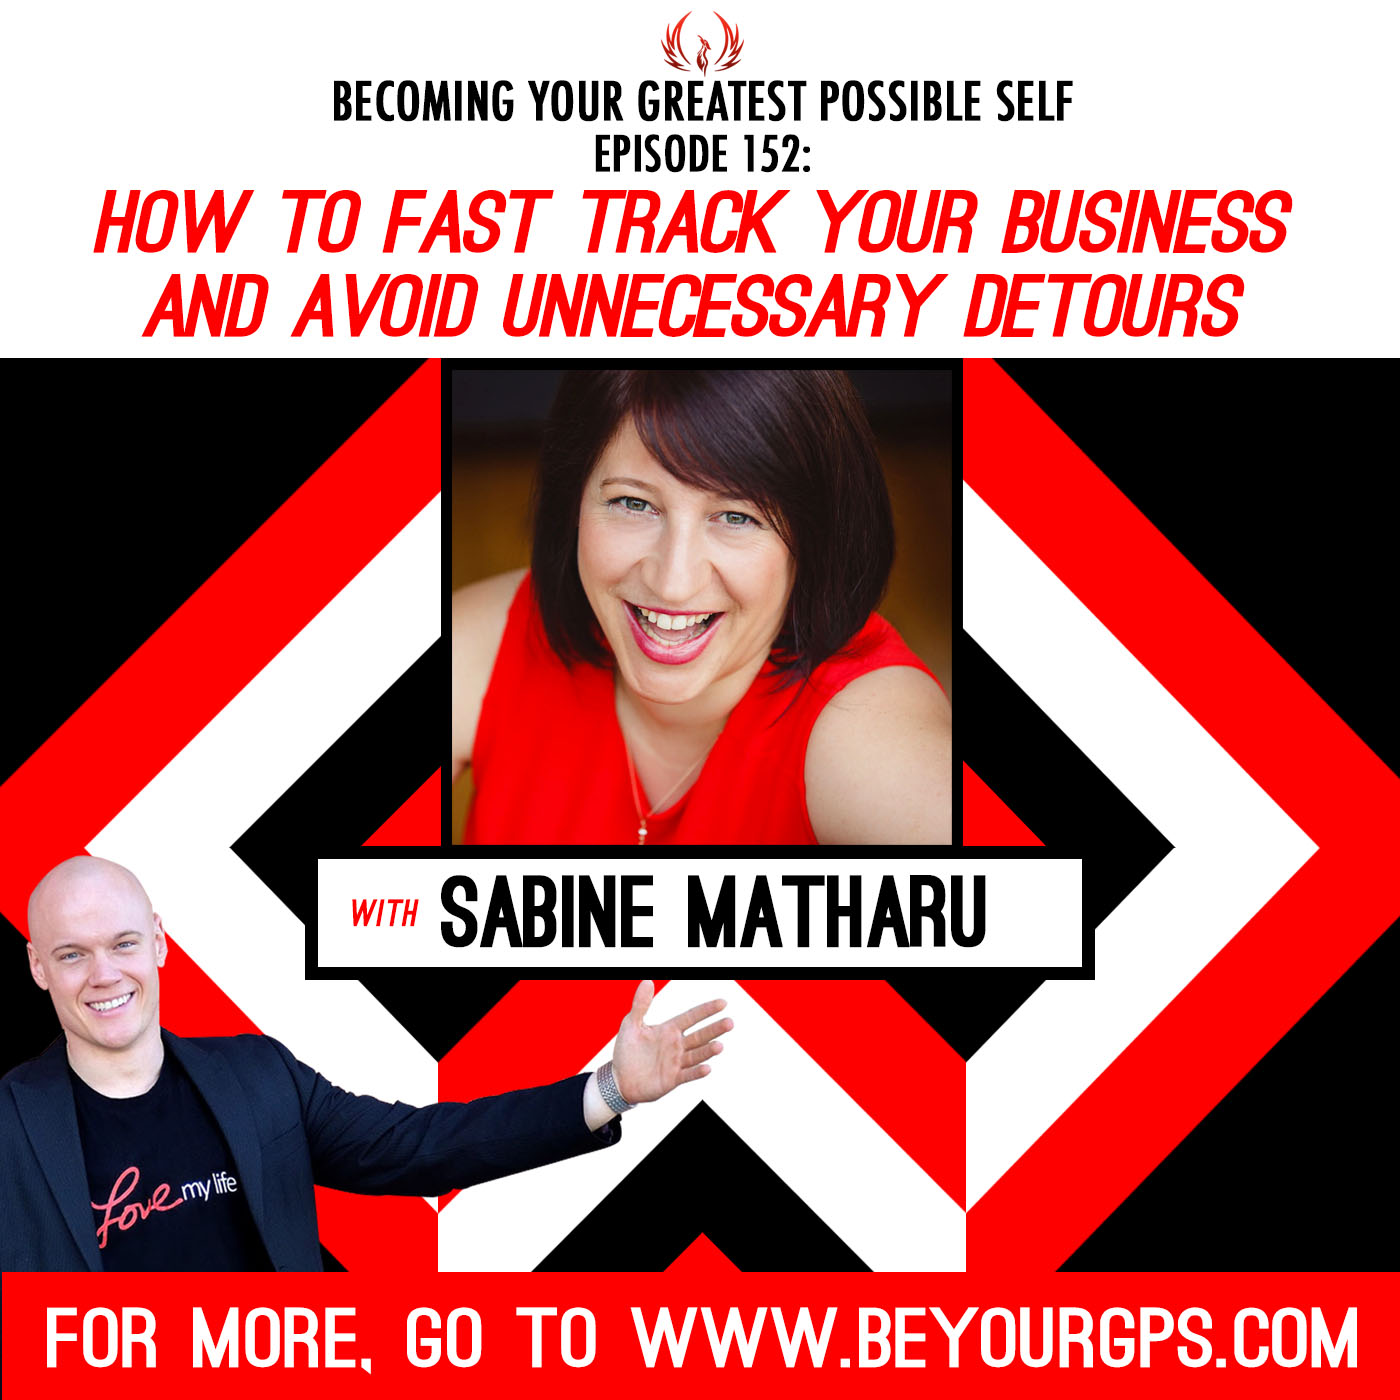 How to Fast Track Your Business and Avoid Unnecessary Detours with Sabine Matharu